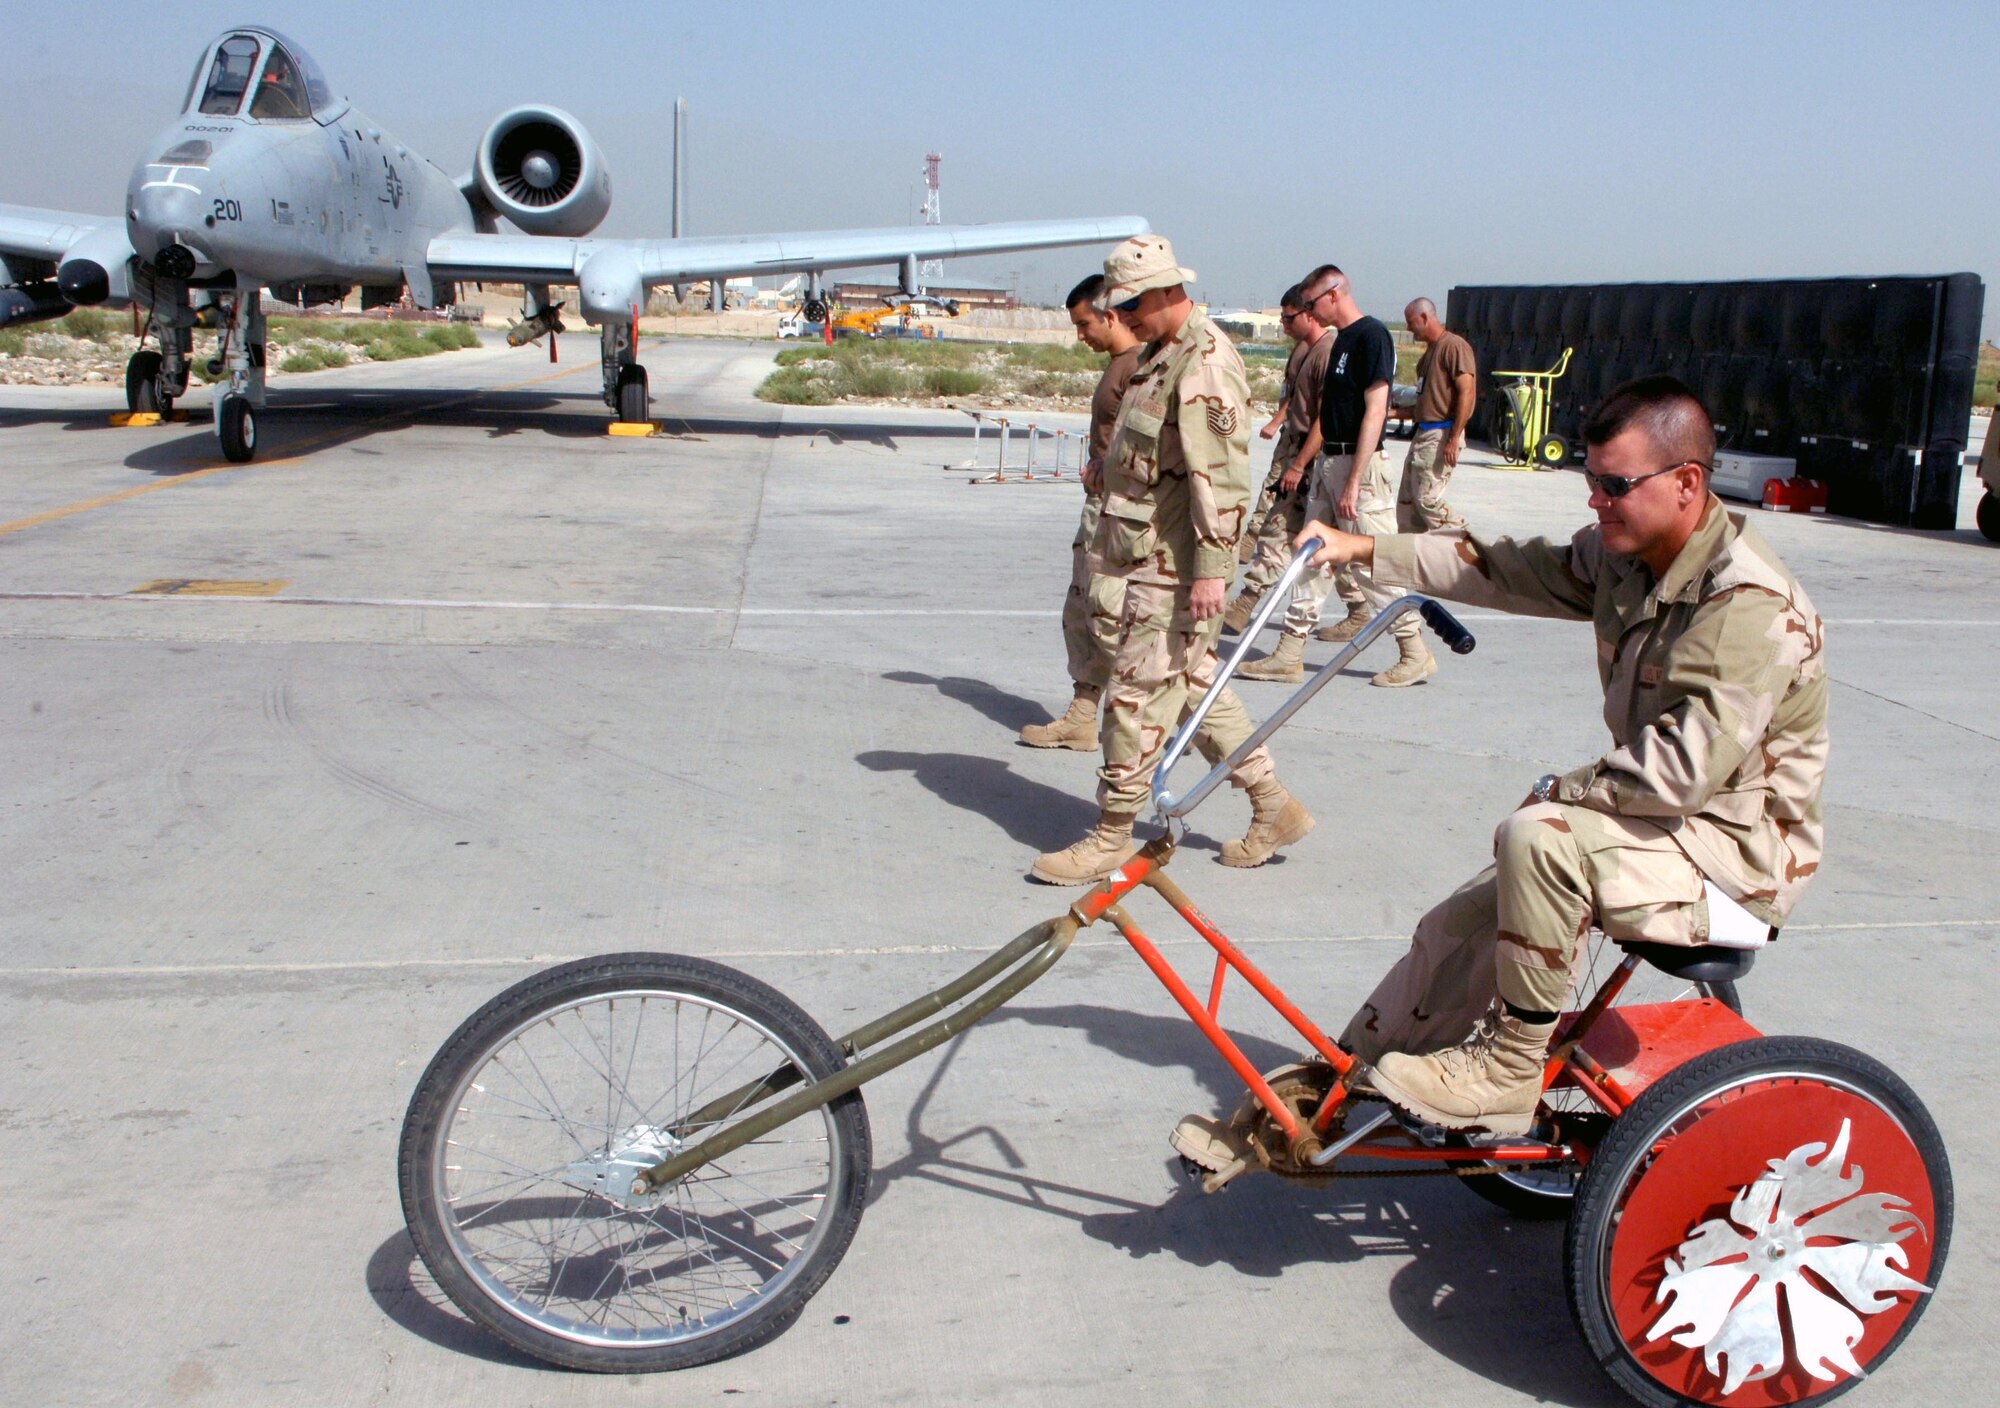 Capt. Jason Weiser rides a bike during a foreign object damage walk Aug. 1 on the flight line at Bagram Airfield, Afghanistan. The captain's section built the bike while they've been deployed here. Captain Weiser is a member of the 455th Expeditionary Maintenance Group. (U.S. Air Force photo by Master Sgt. Orville F. Desjarlais Jr.)